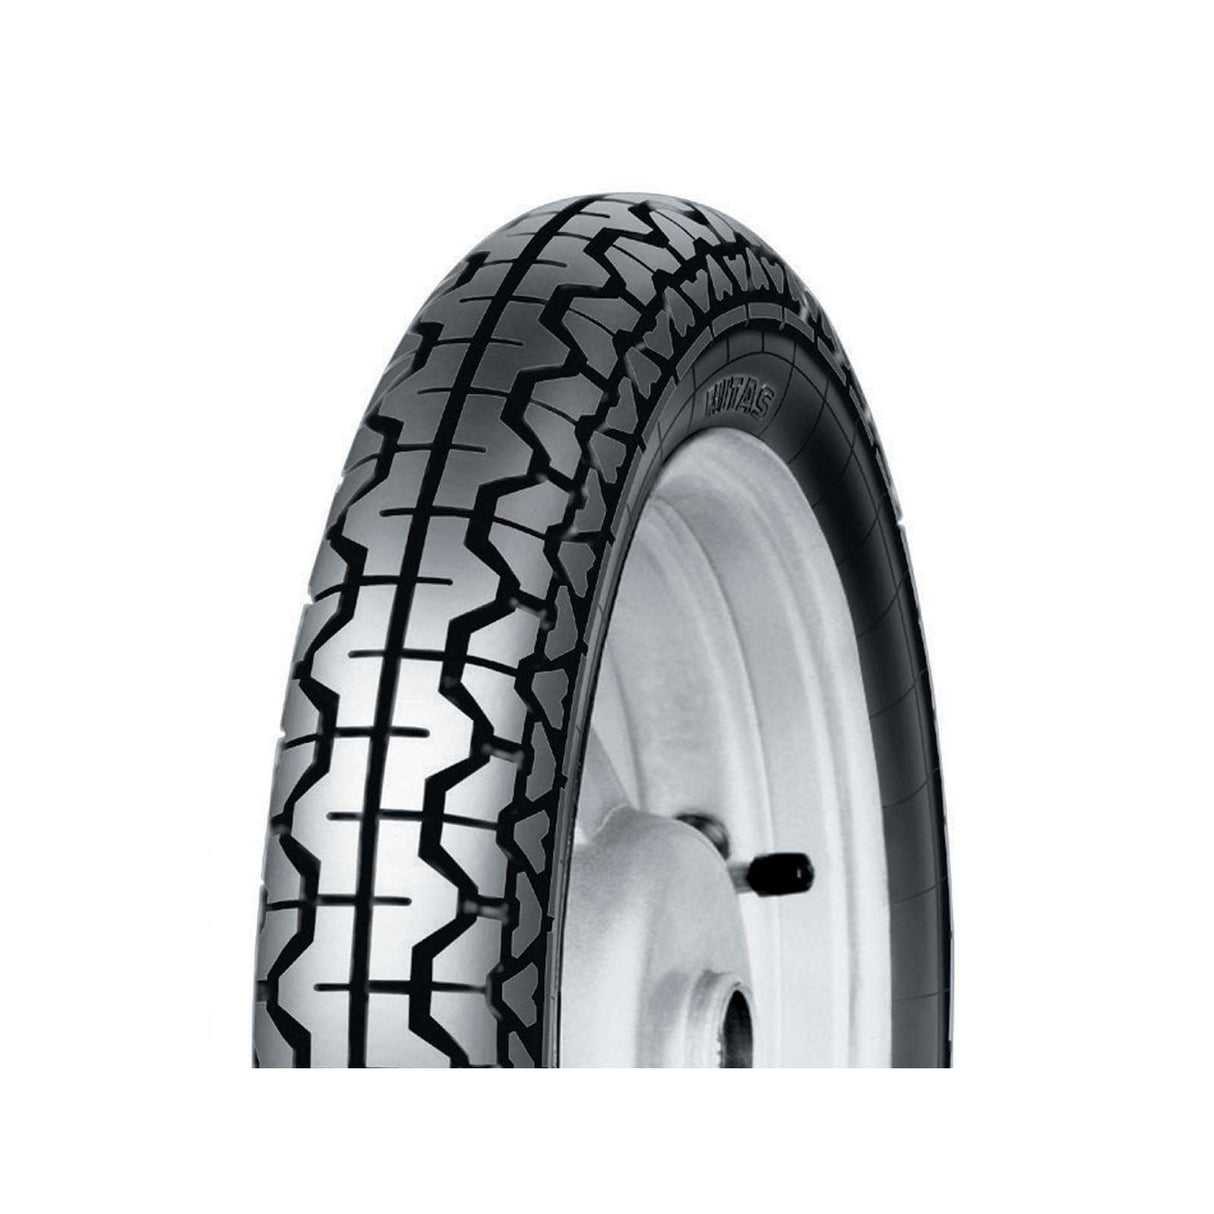 2.75-16 H06 Classic Reinf. Mitas Highway Tyre